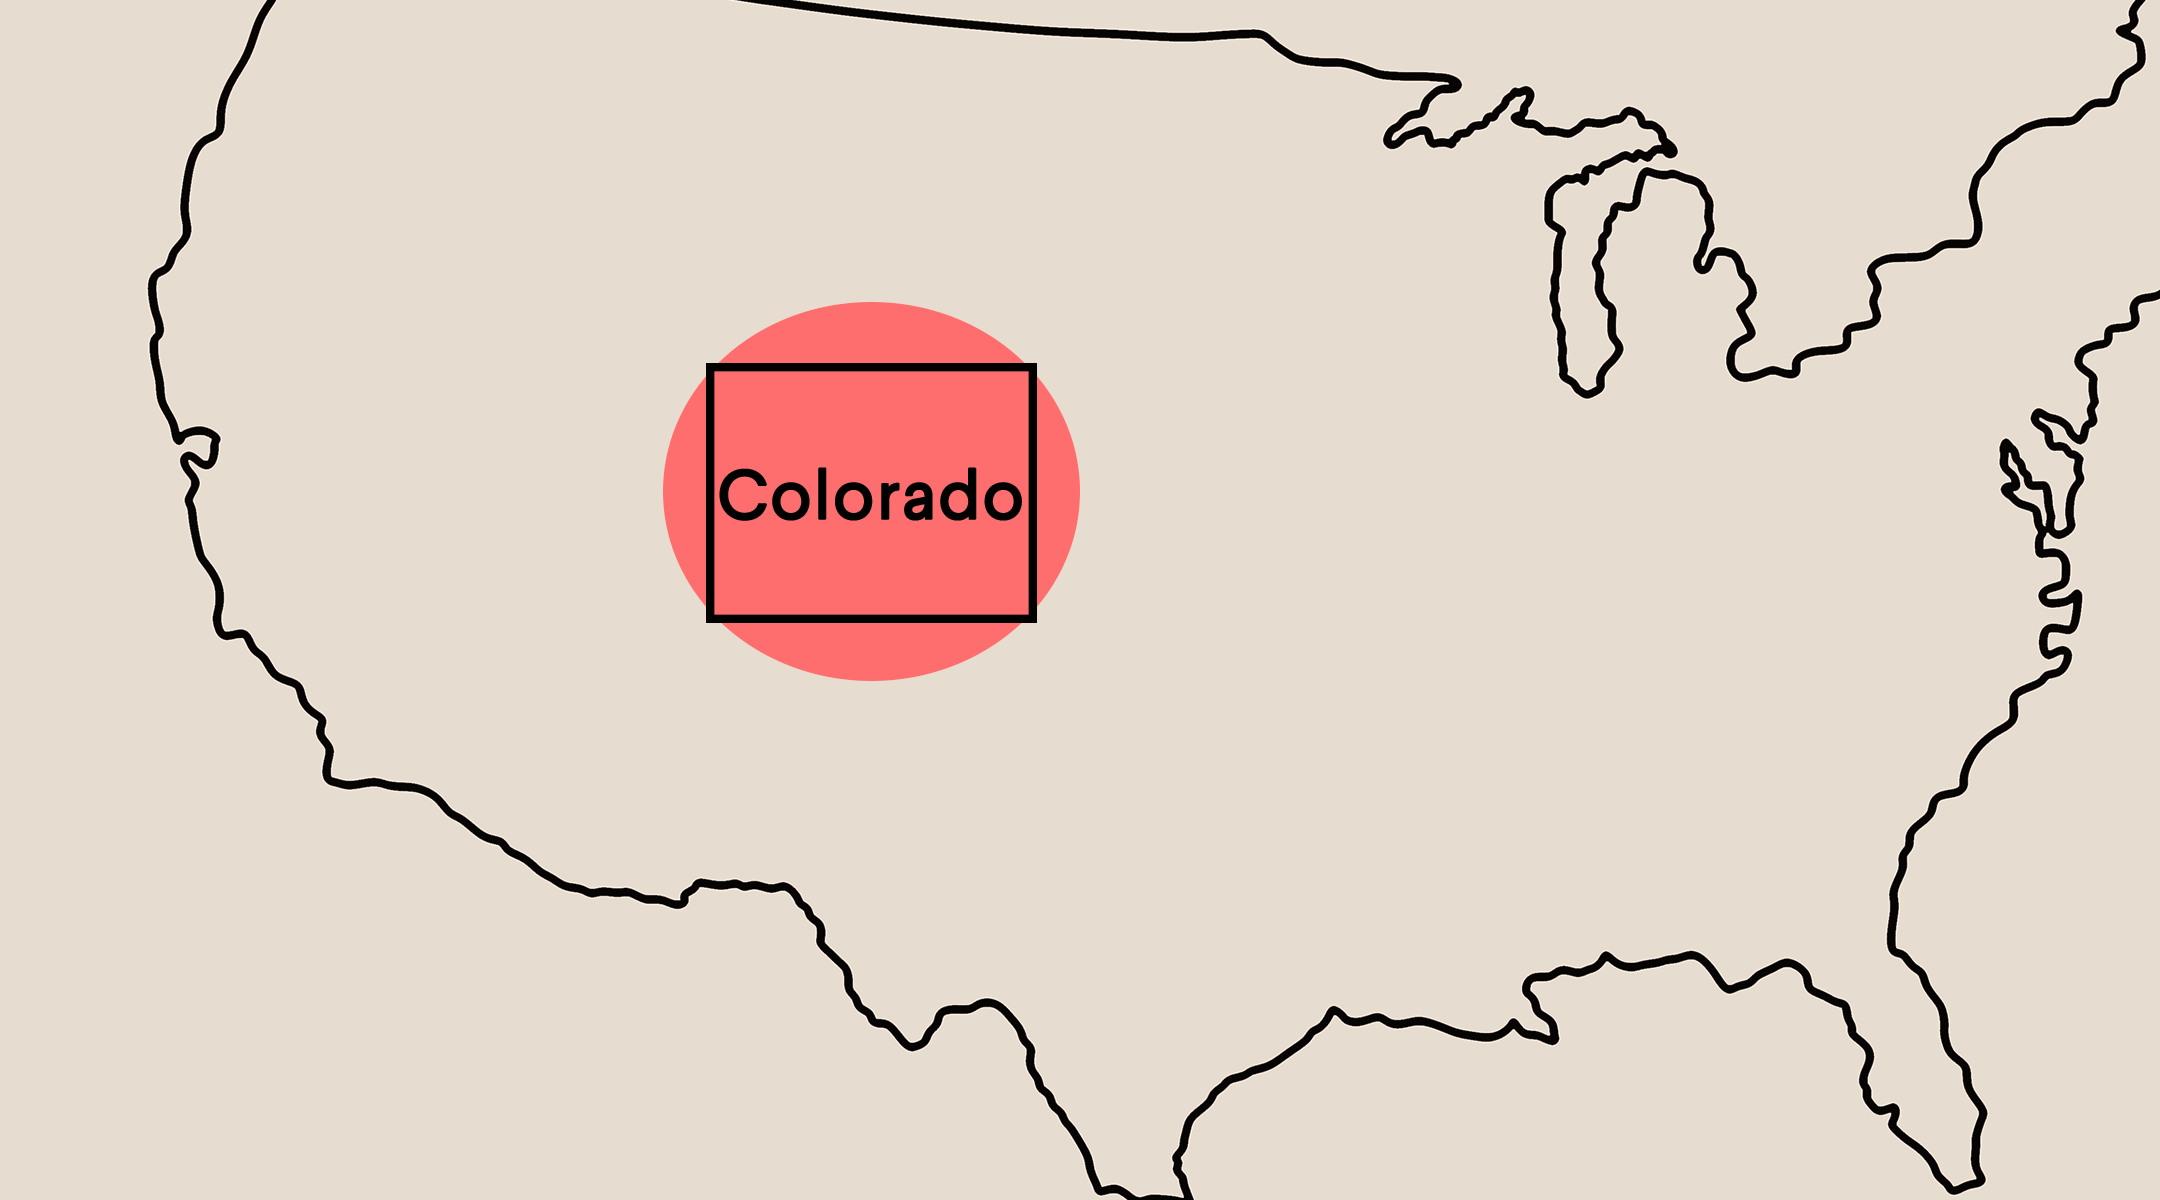 map of the united states with colorado circled in pink, which represents the chicken pox parties taking place there